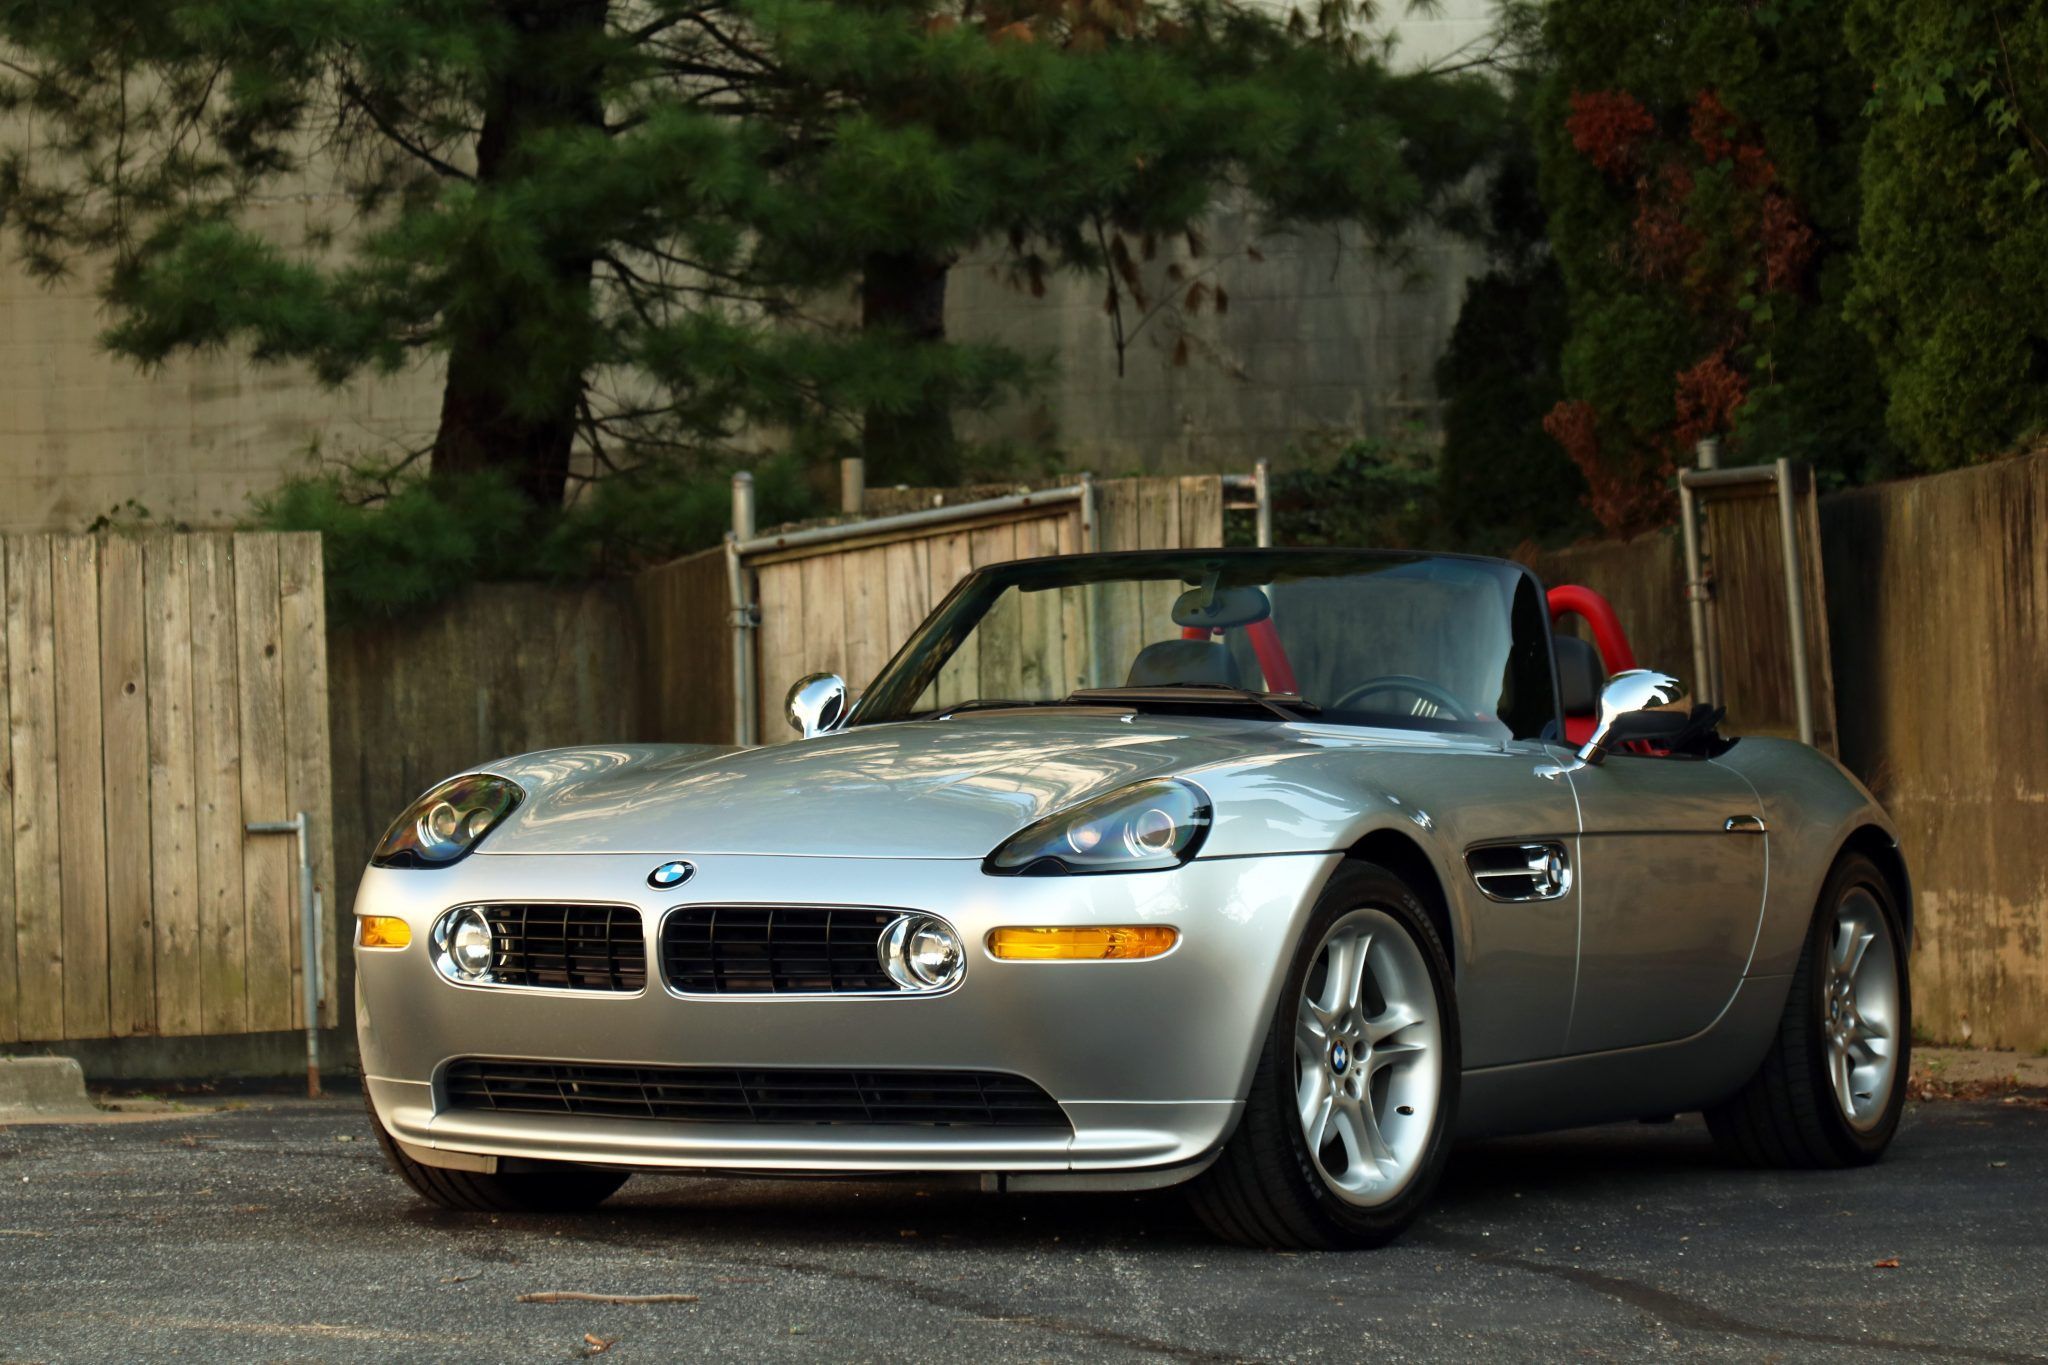 Nauwgezet Vul in Weven The BMW Z8 Is One of the Most Beautiful Cars Ever Built